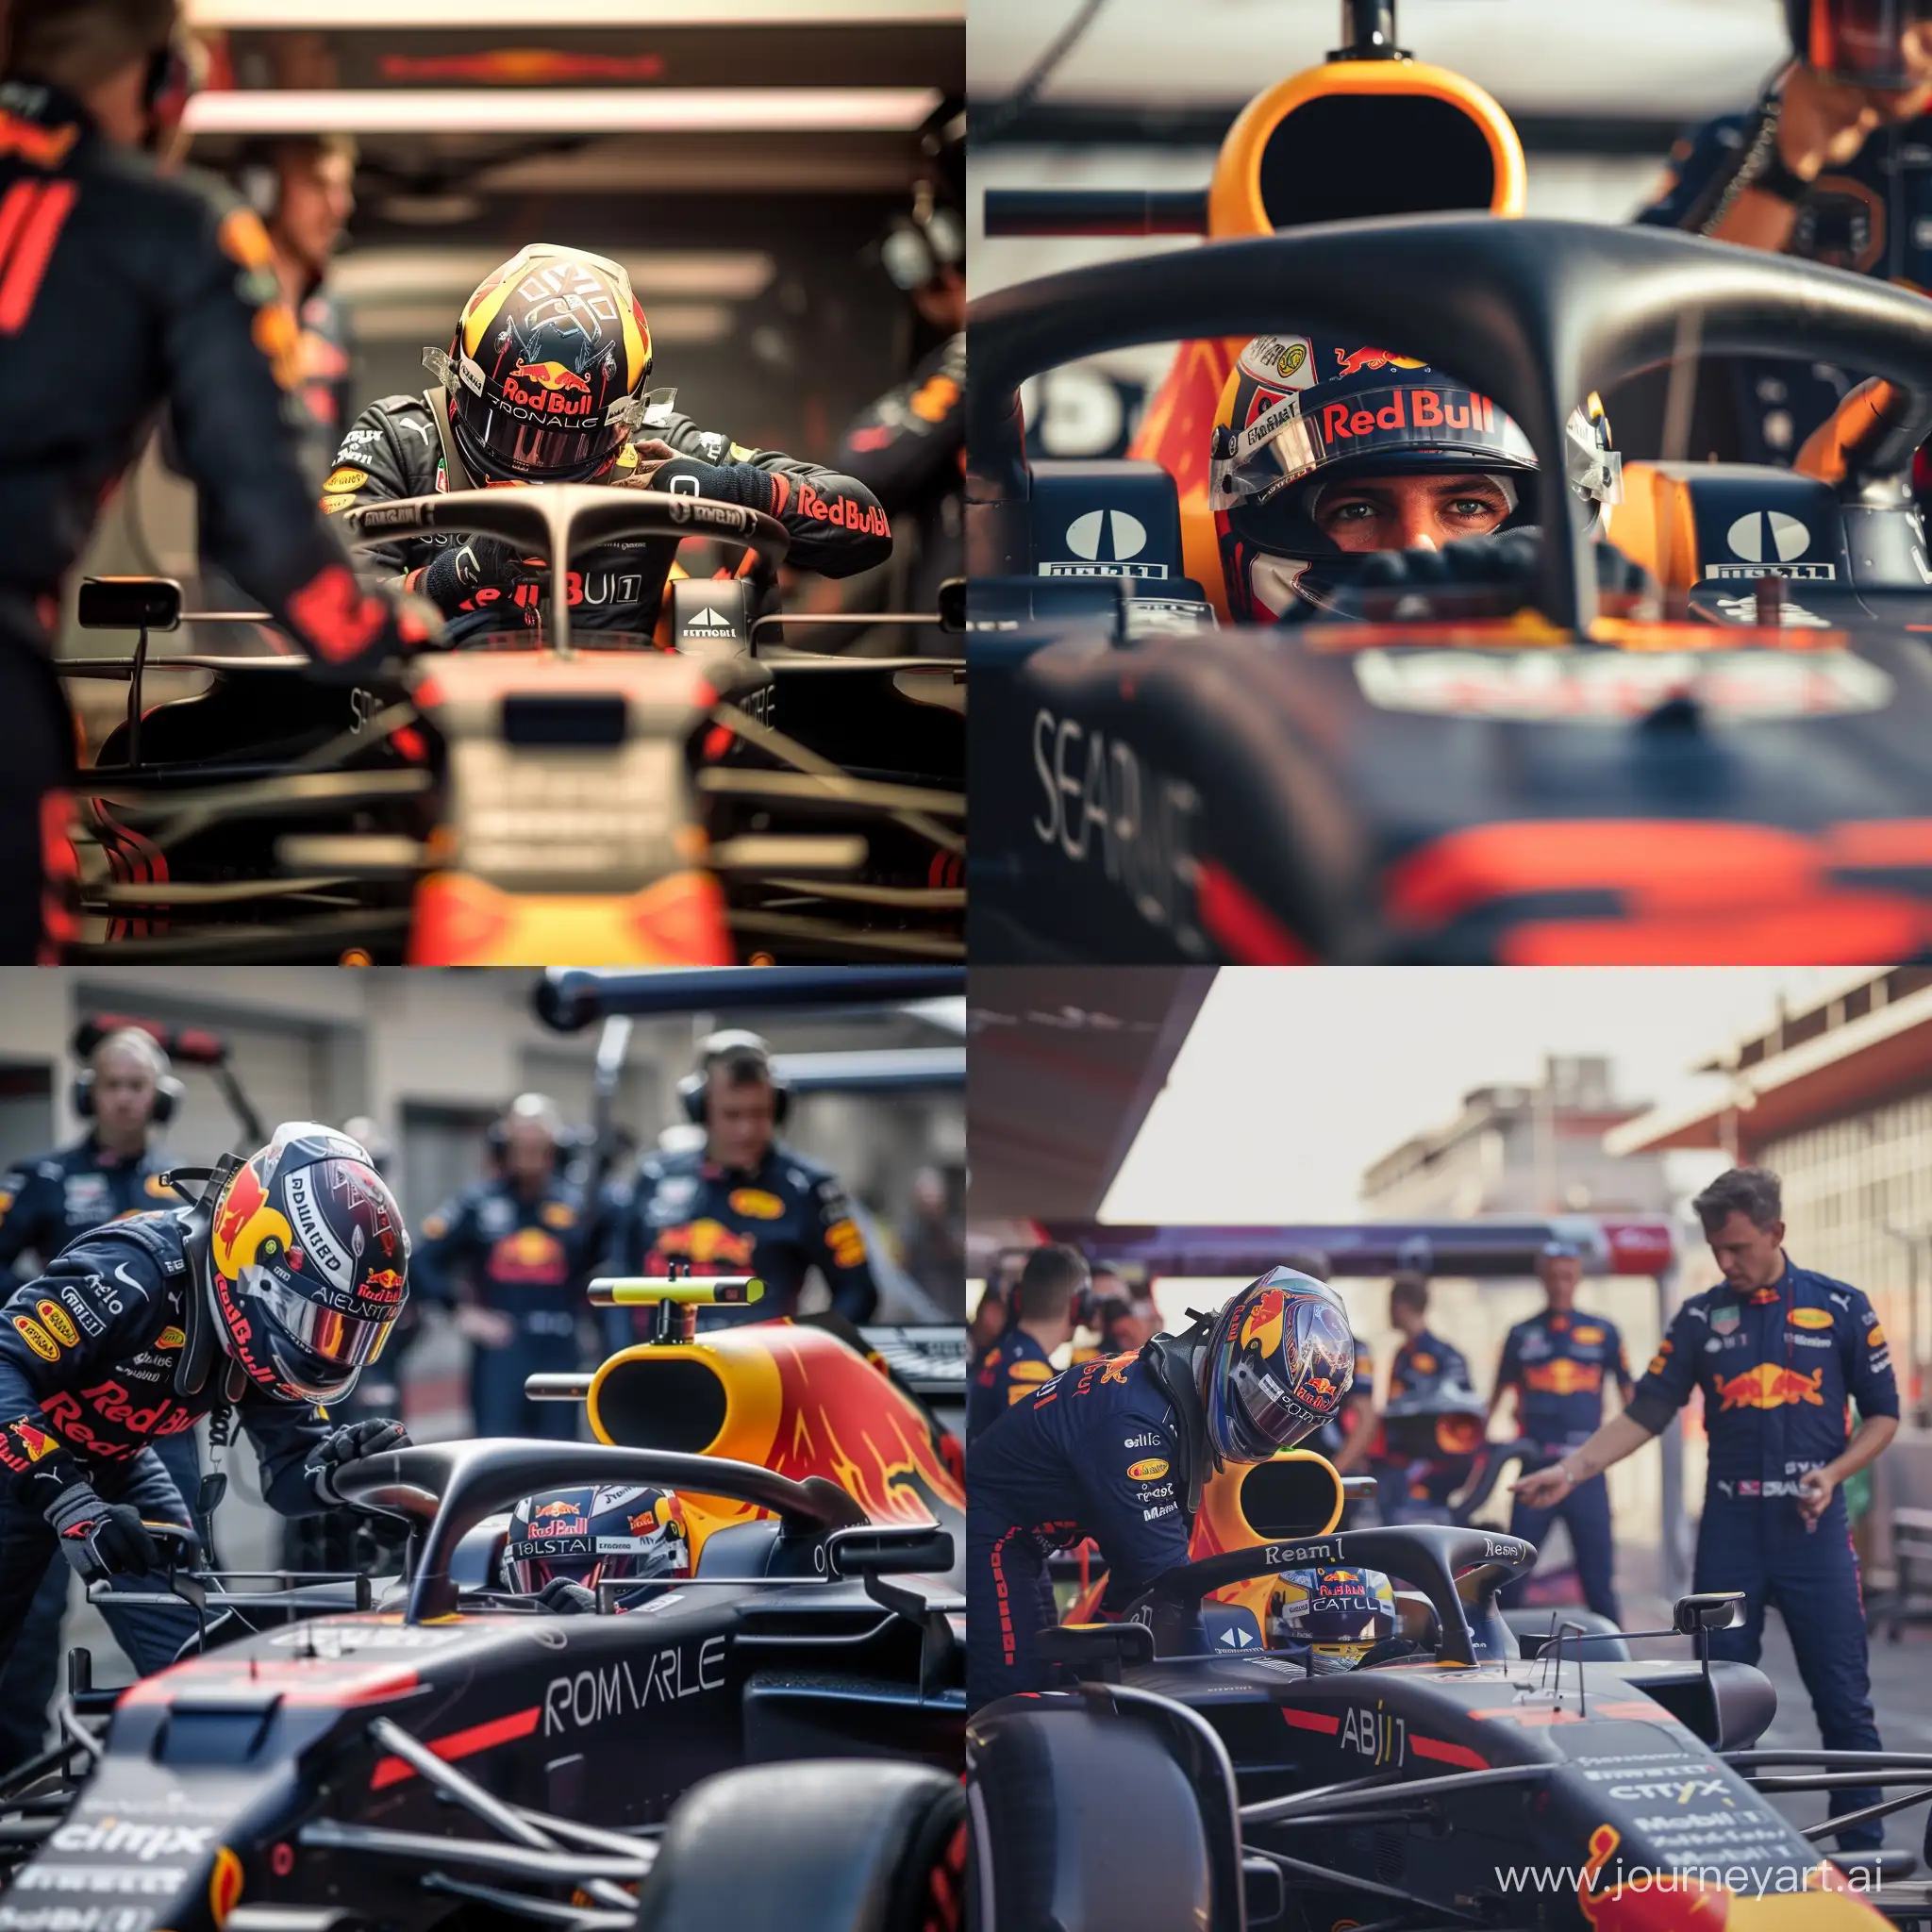 Red-Bull-Formula-1-Driver-in-Pit-Box-with-V6-Engine